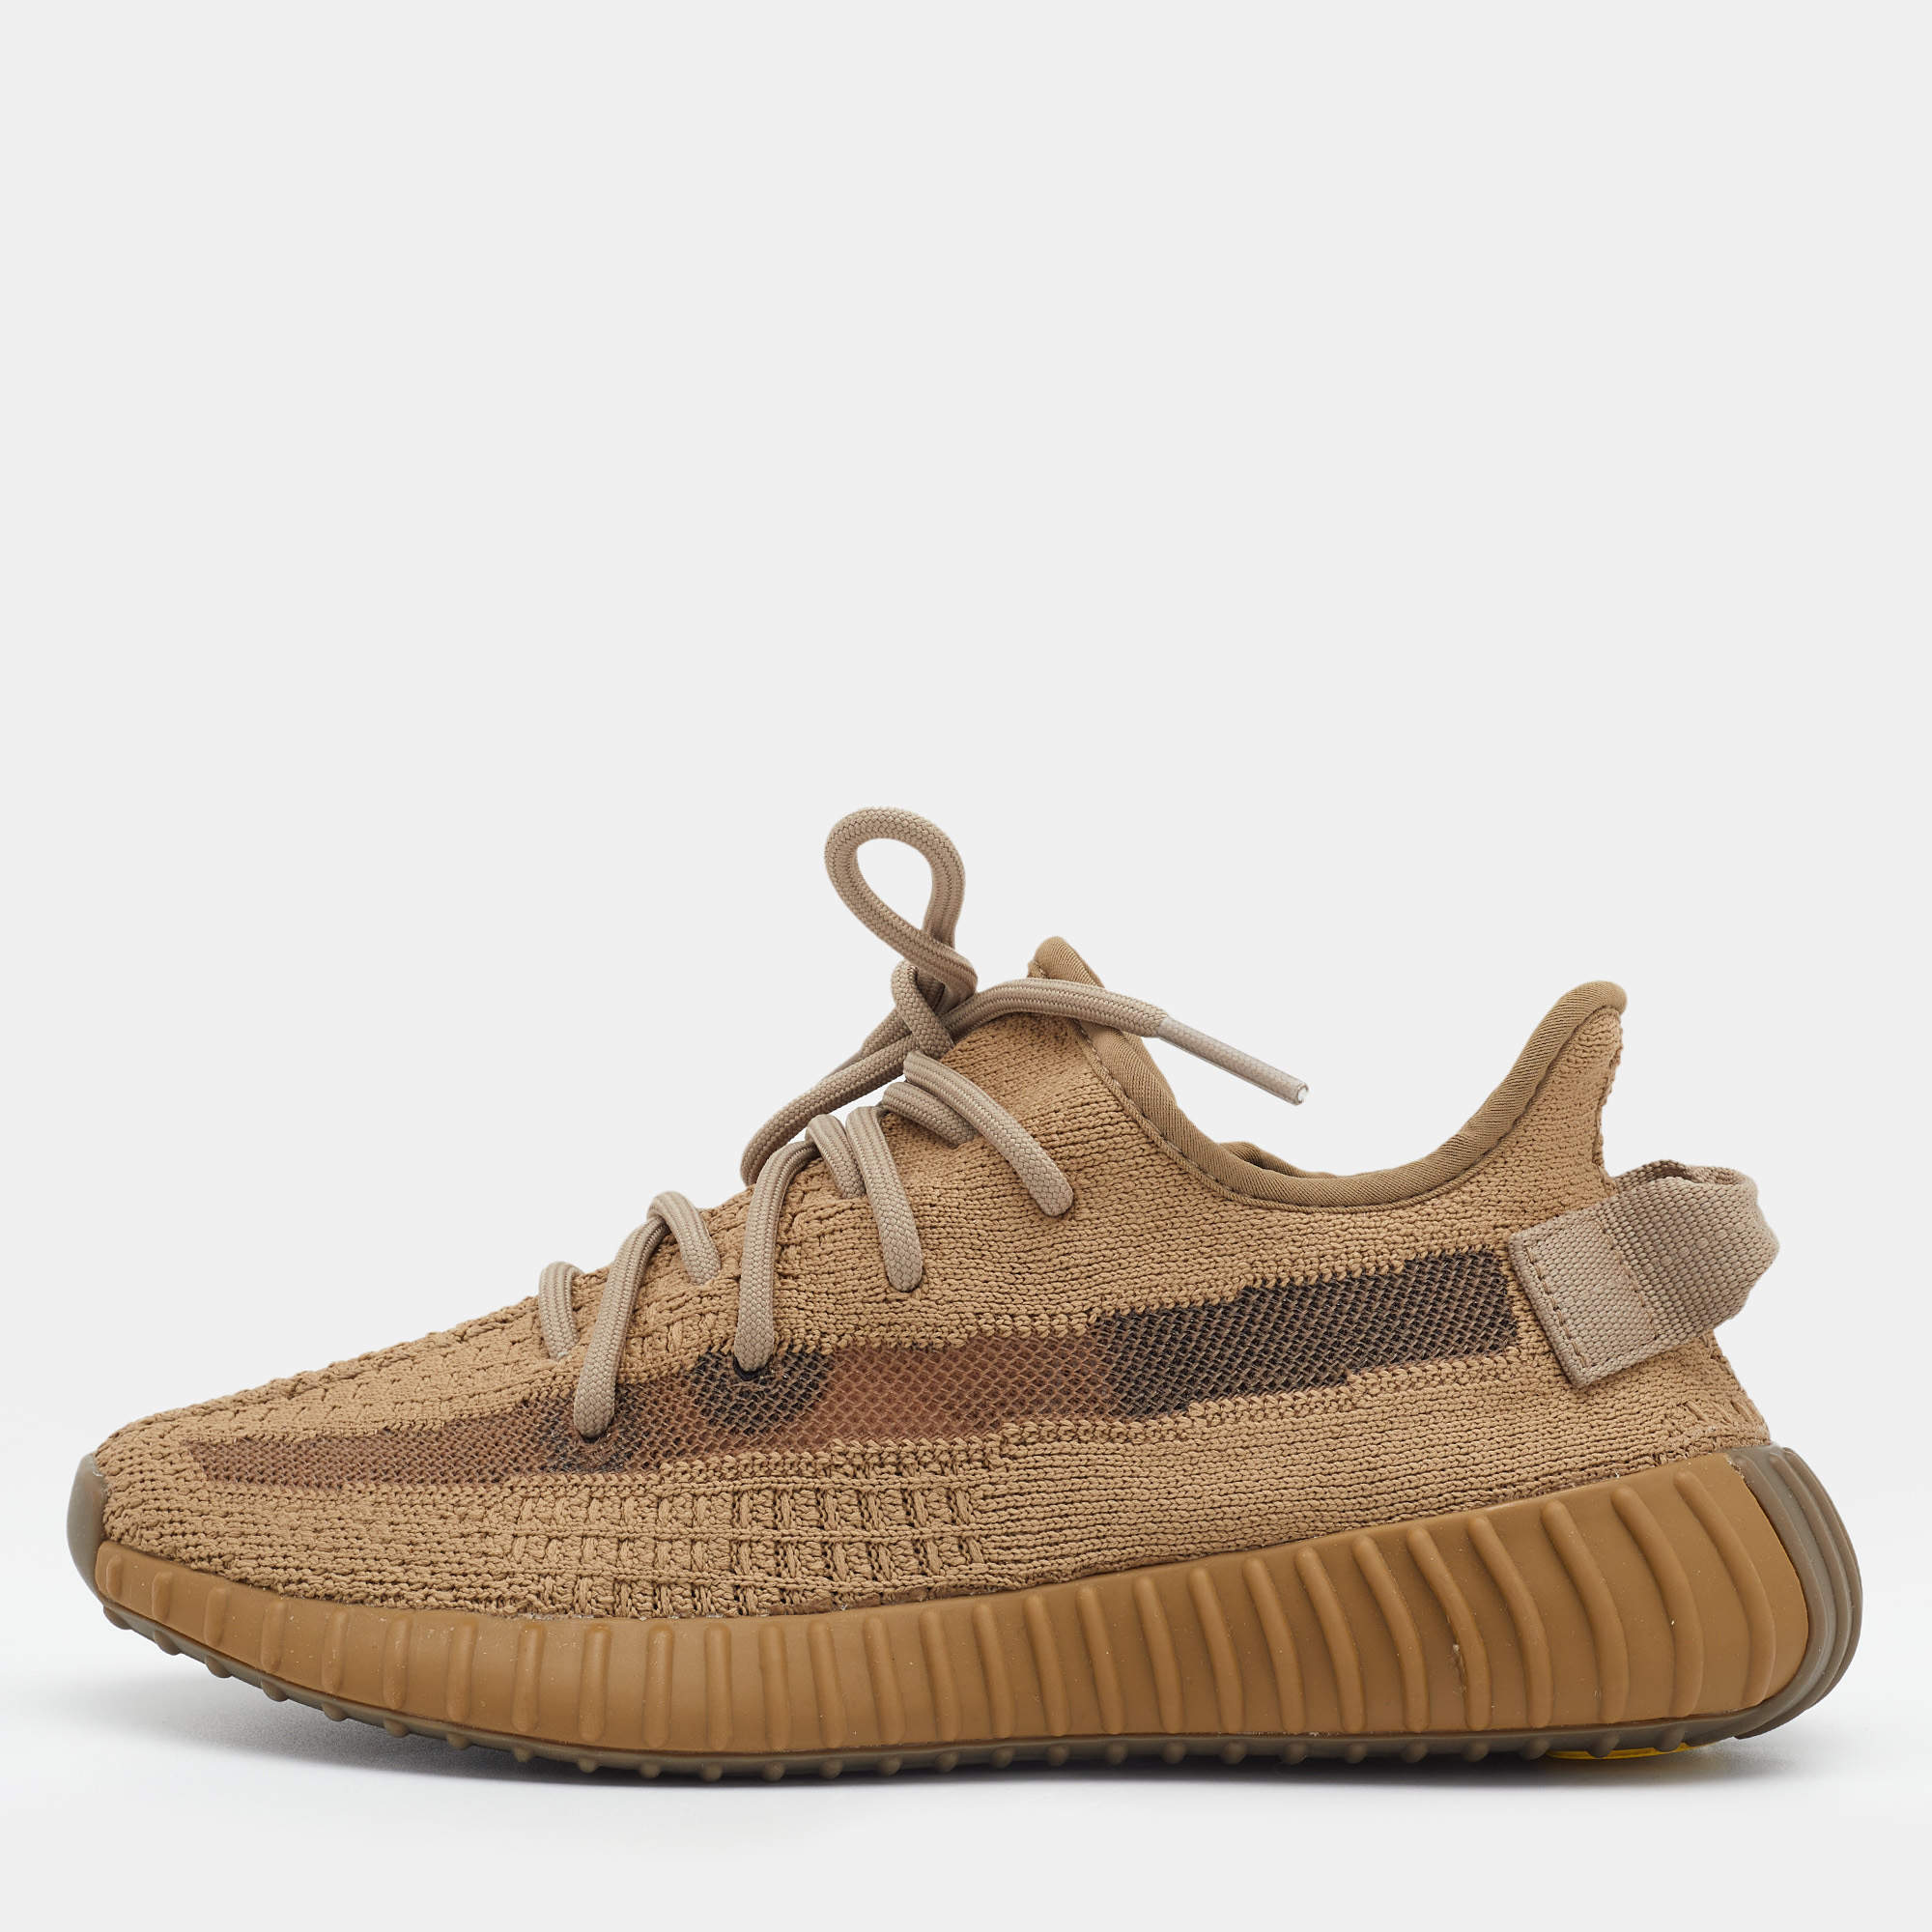 Yeezy x Adidas Brown Suede Boost 350 V2 Oxford Tan Sneakers Size 42